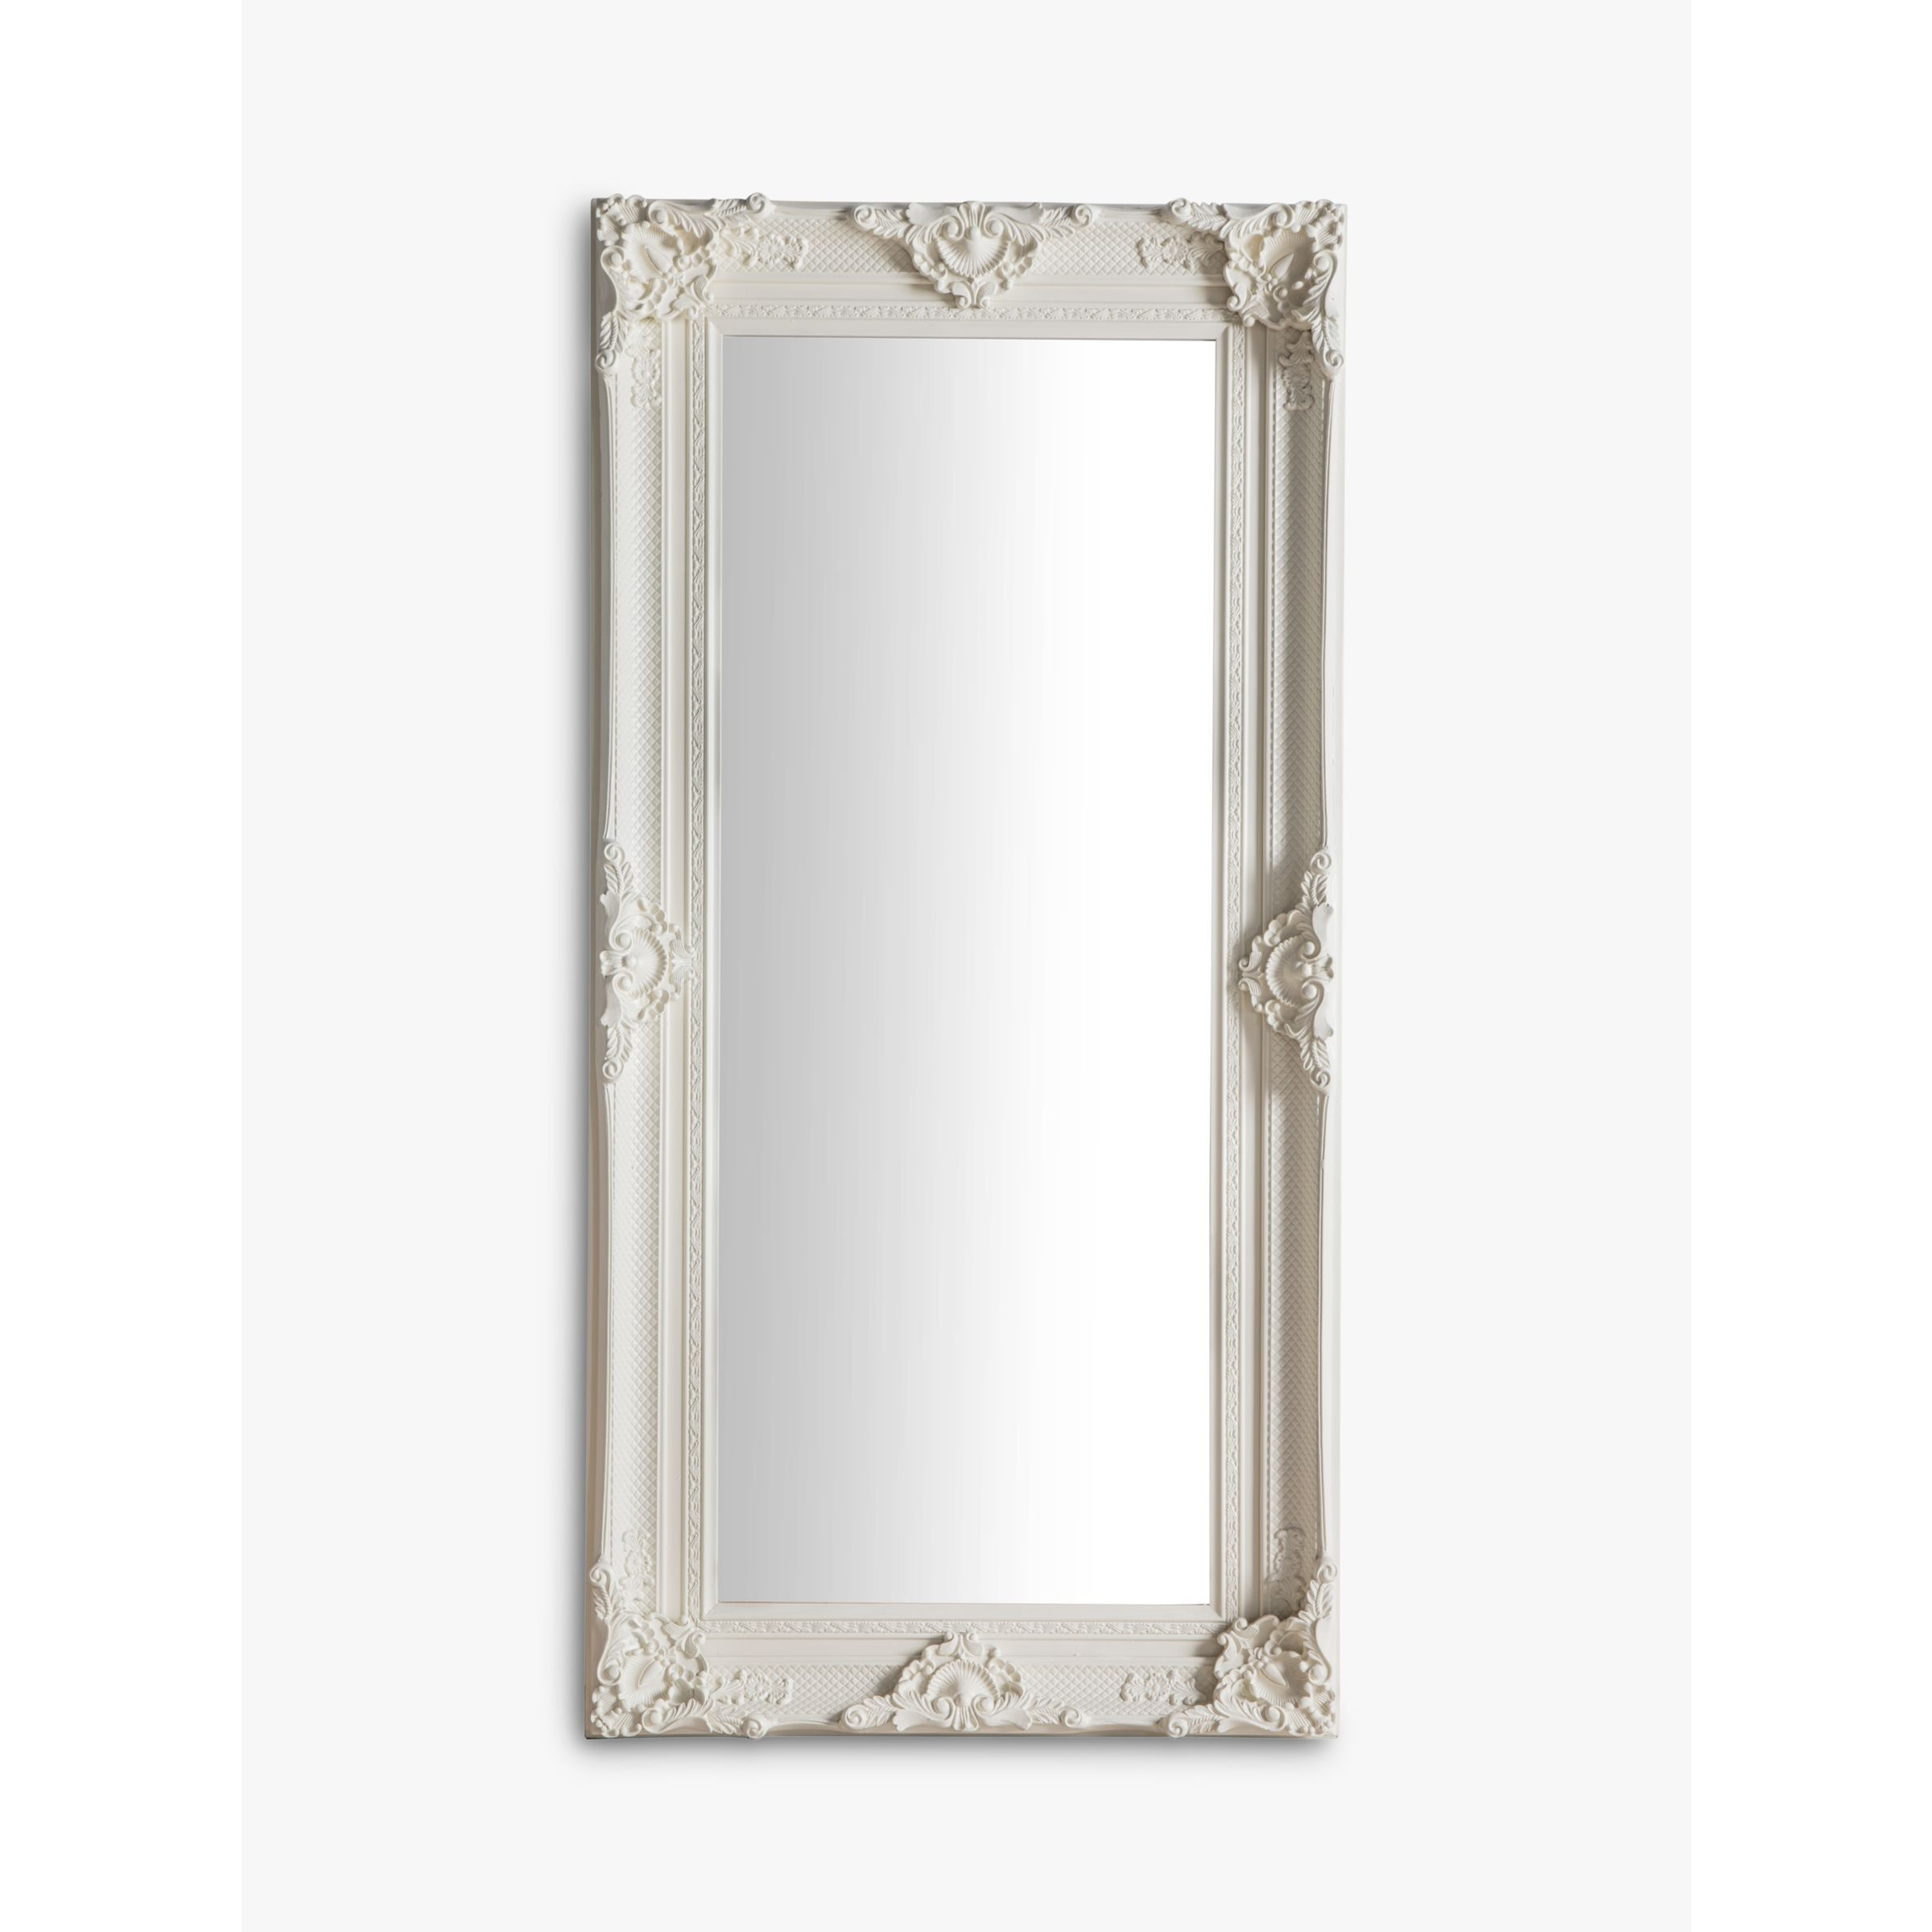 Gallery Direct Louvel Leaner Mirror, 177 x 88cm - image 1